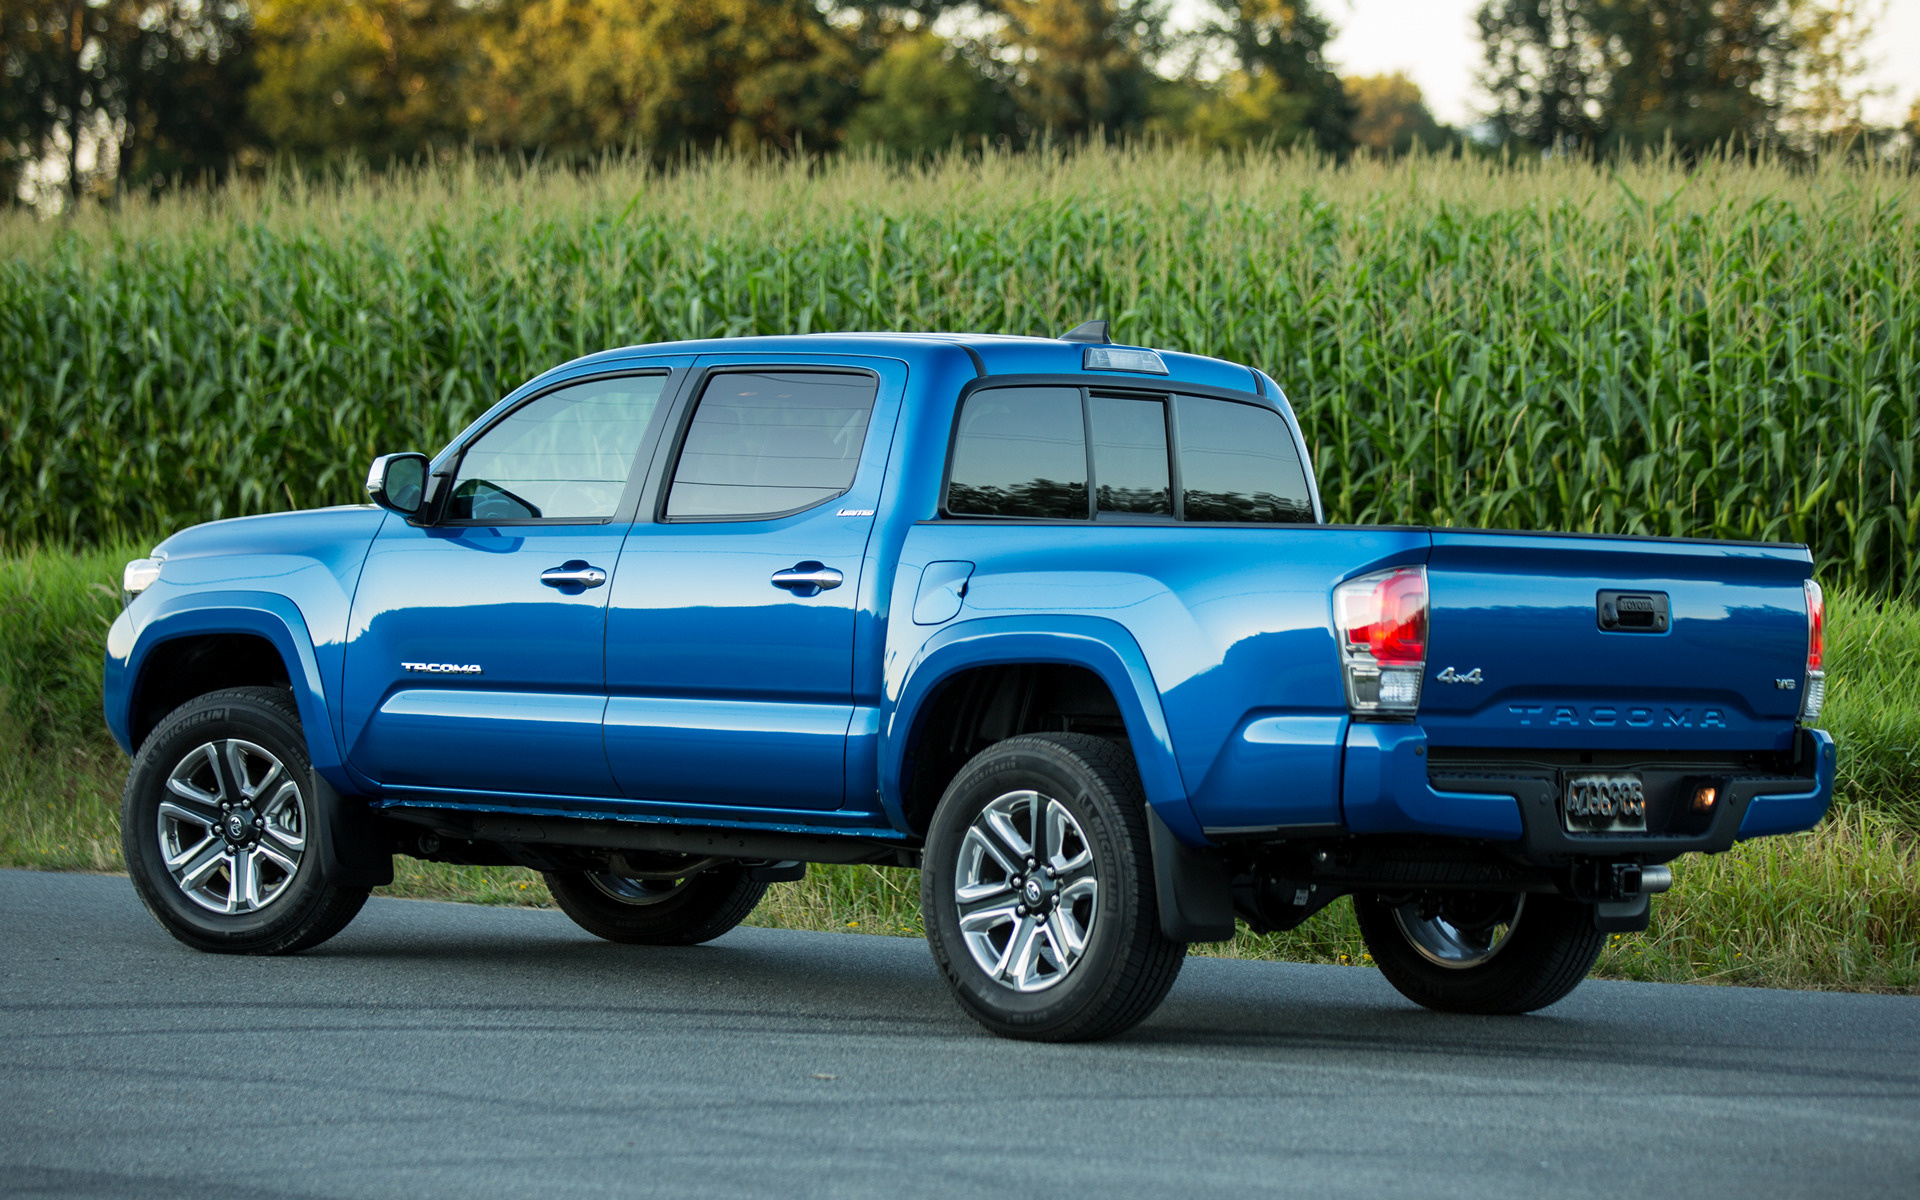 2016 Toyota Tacoma Limited Double Cab Wallpapers And Hd Images Car